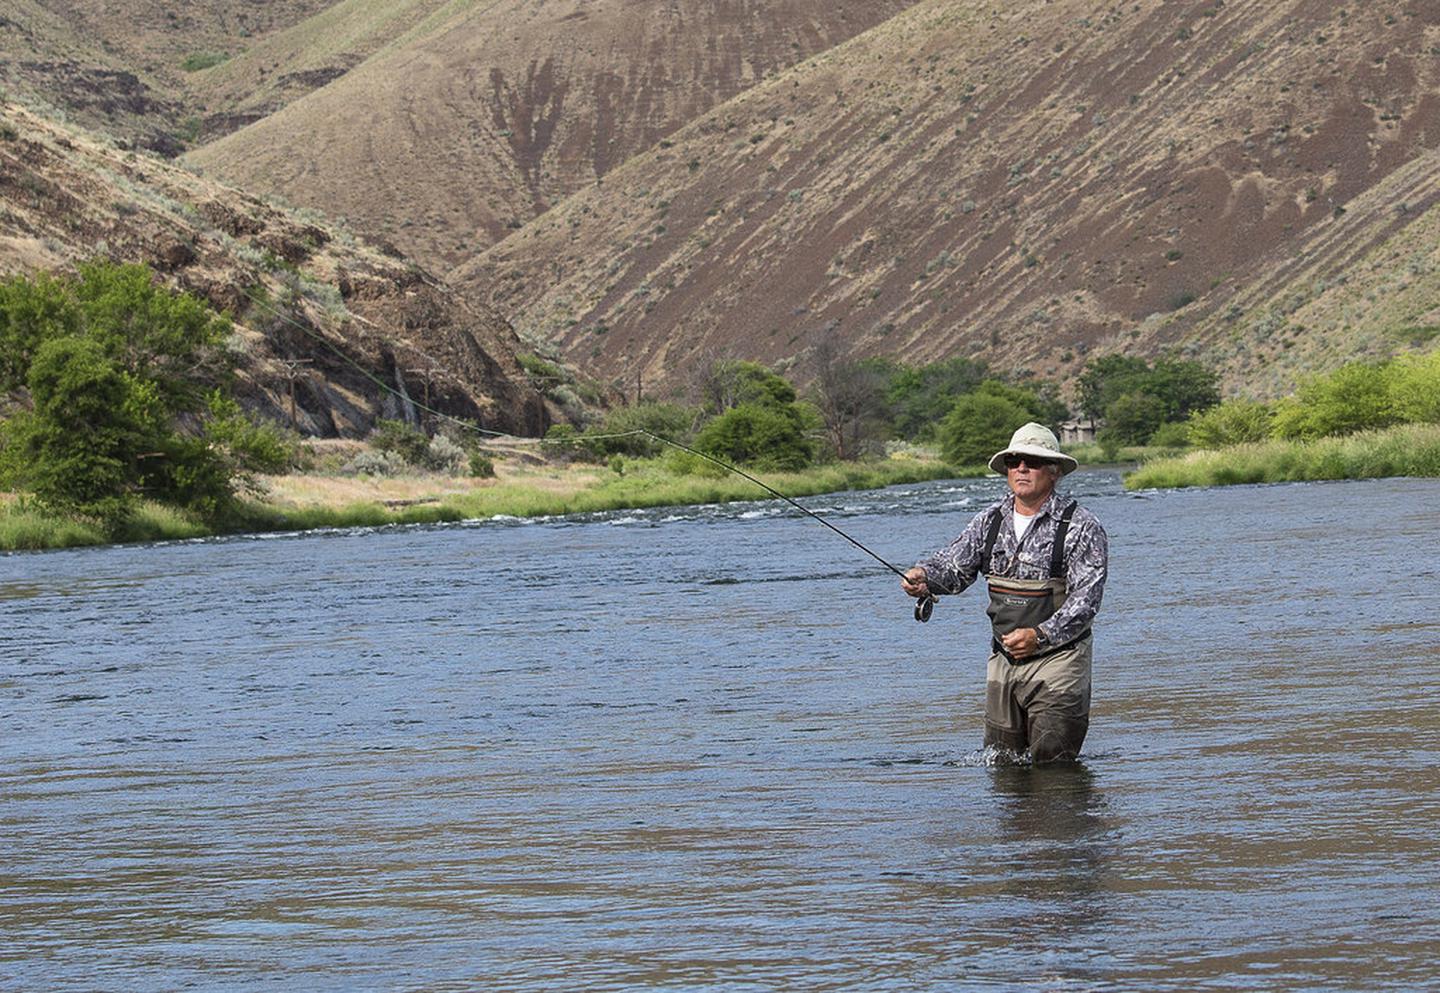 A fly fisherman tries his luck on the Deschutes river.